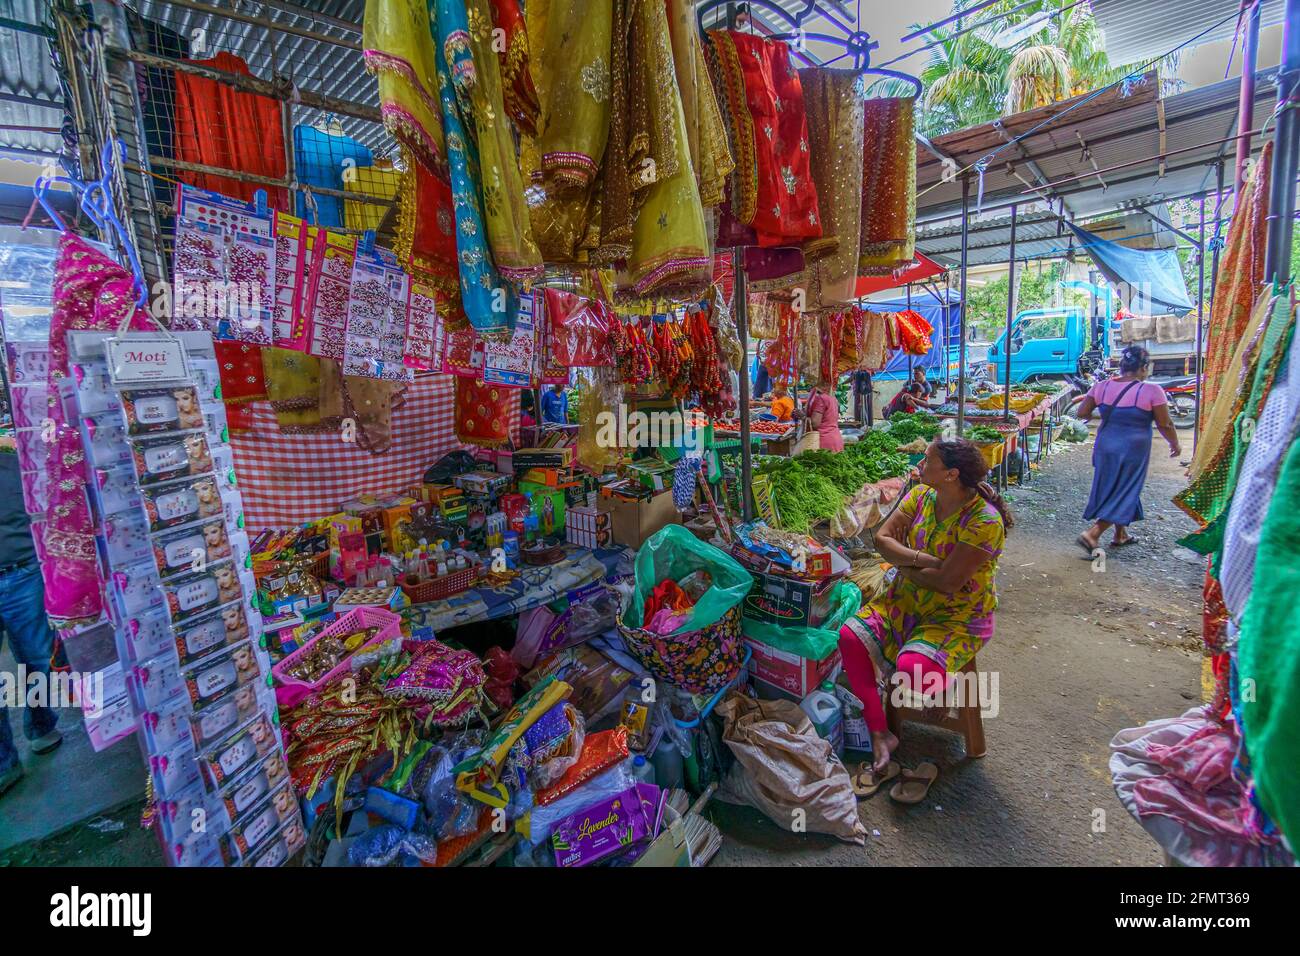 Mauritius island, Indian ocean, December 2015 - Local female vendor, with various products displayed for sale at an open market Stock Photo